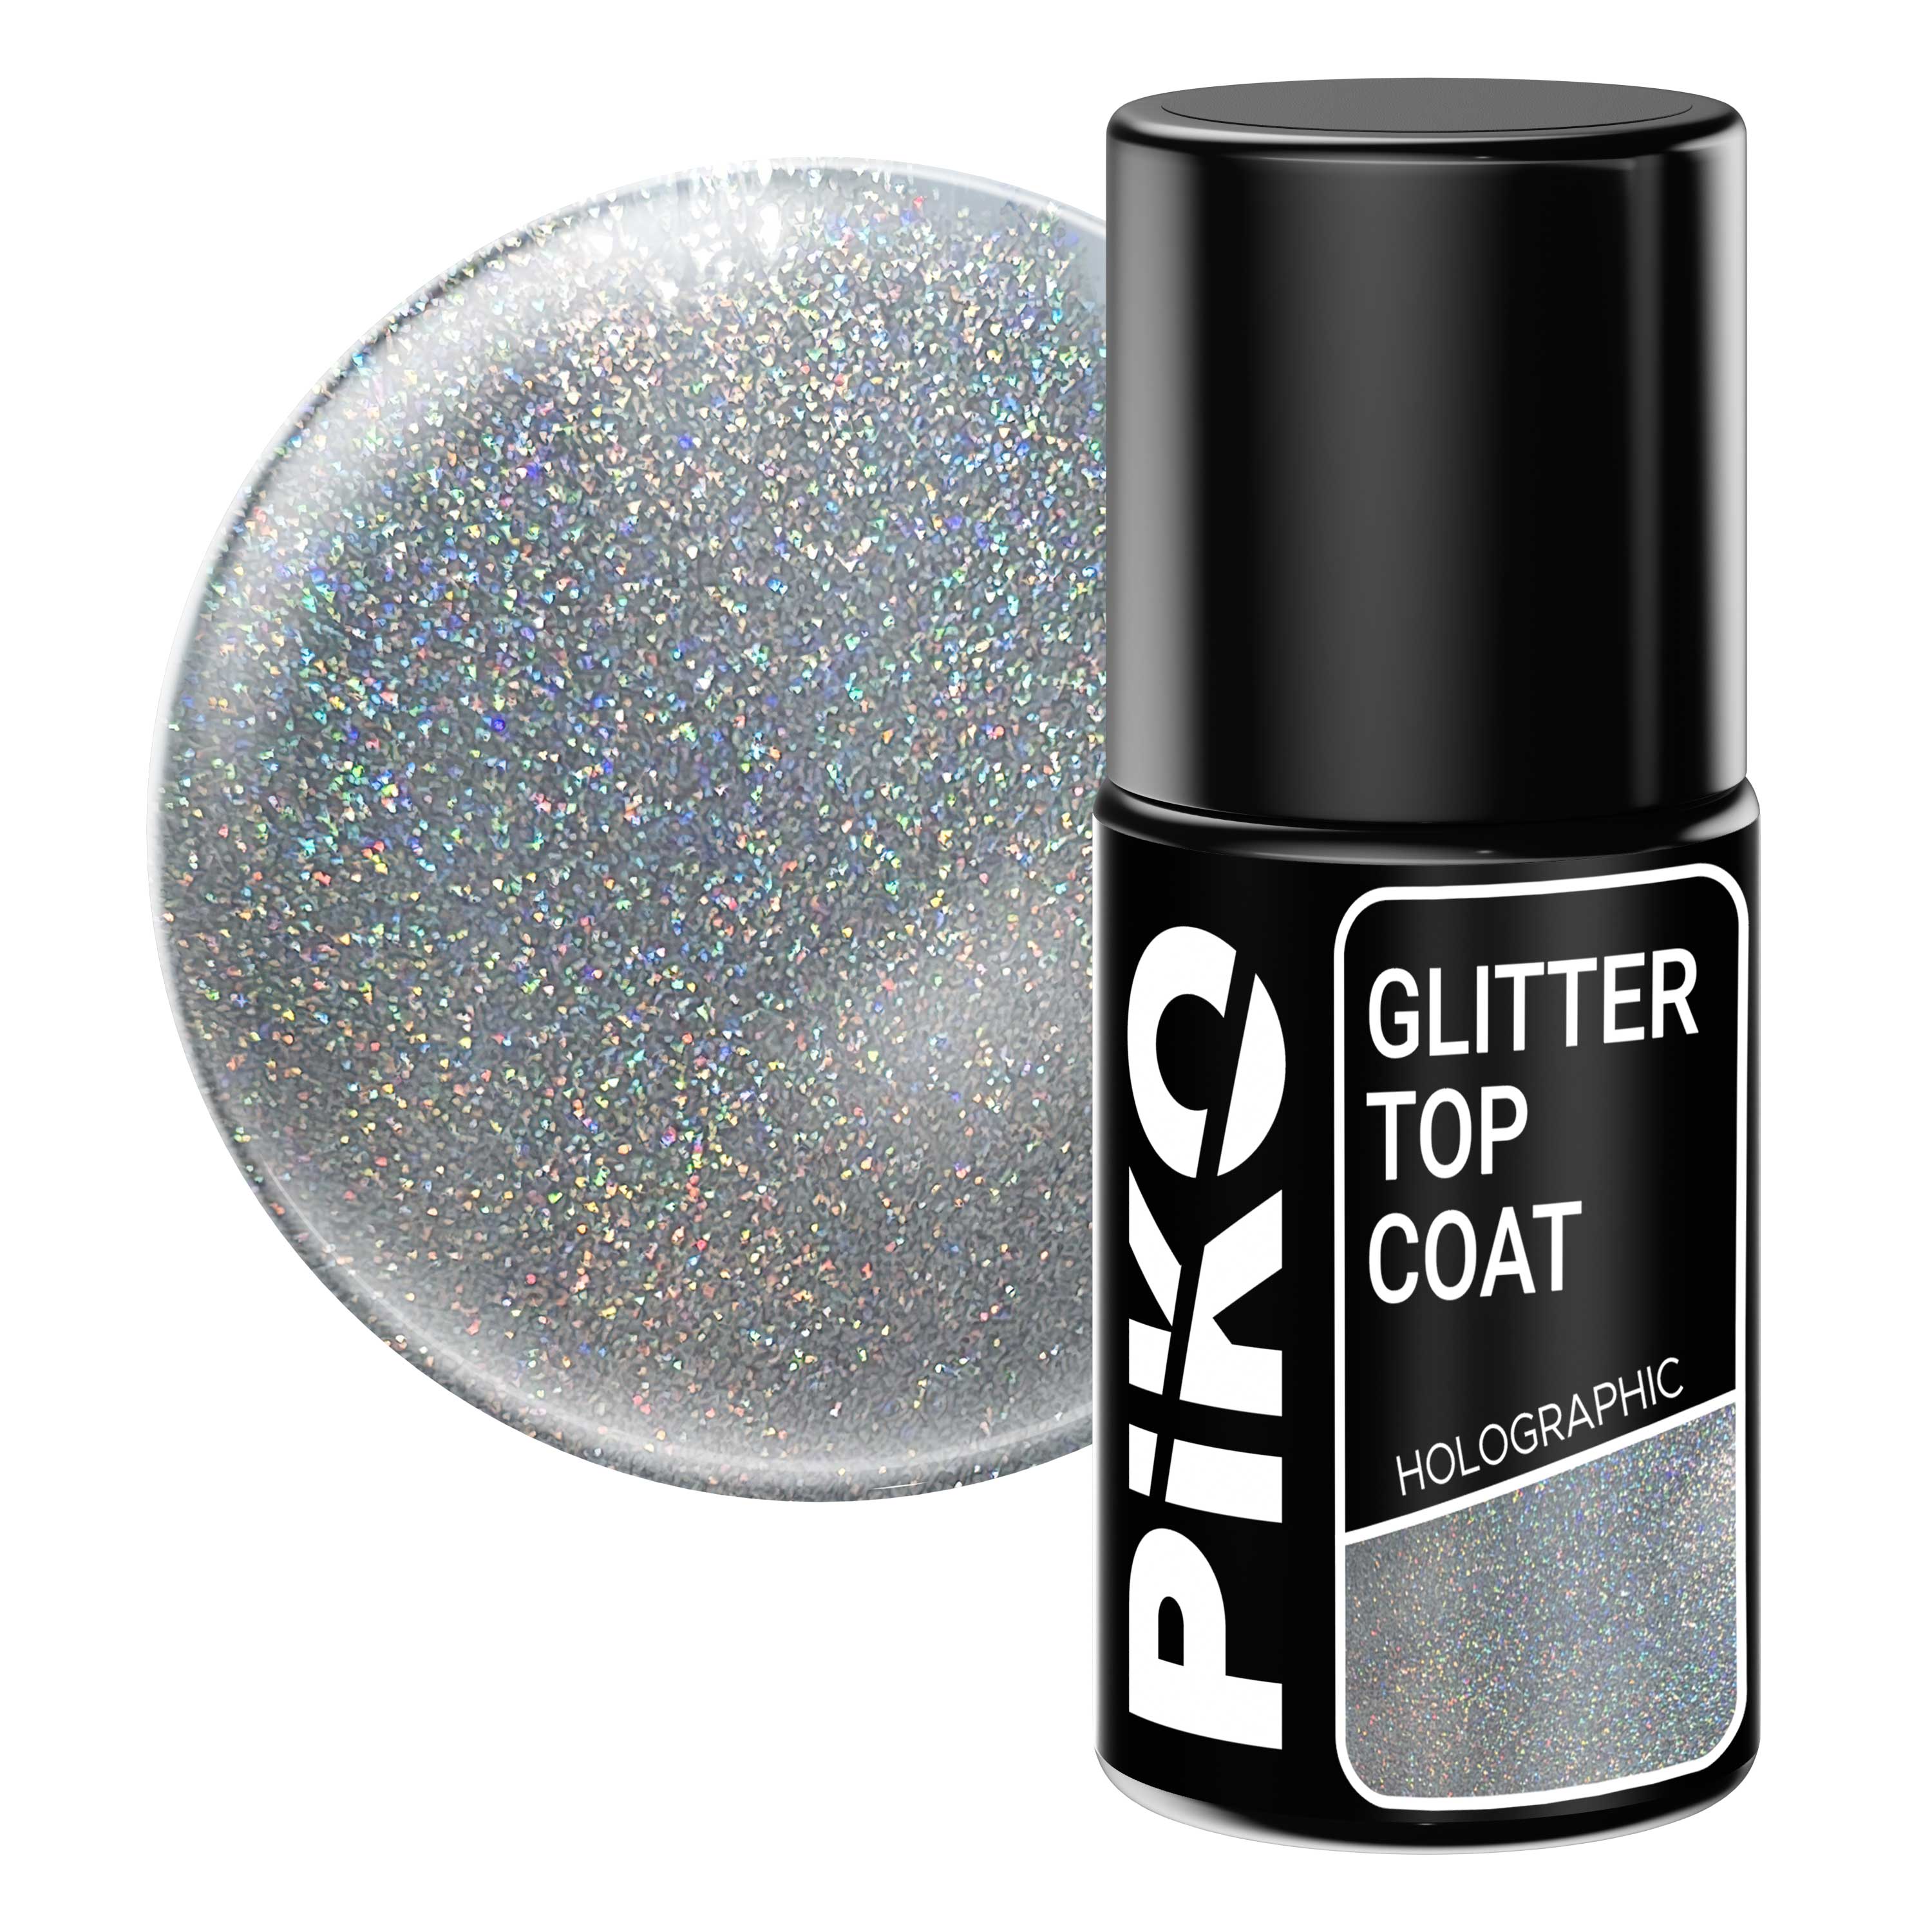 Top coat Piko, Glitter Top, Holographic, 7 ml